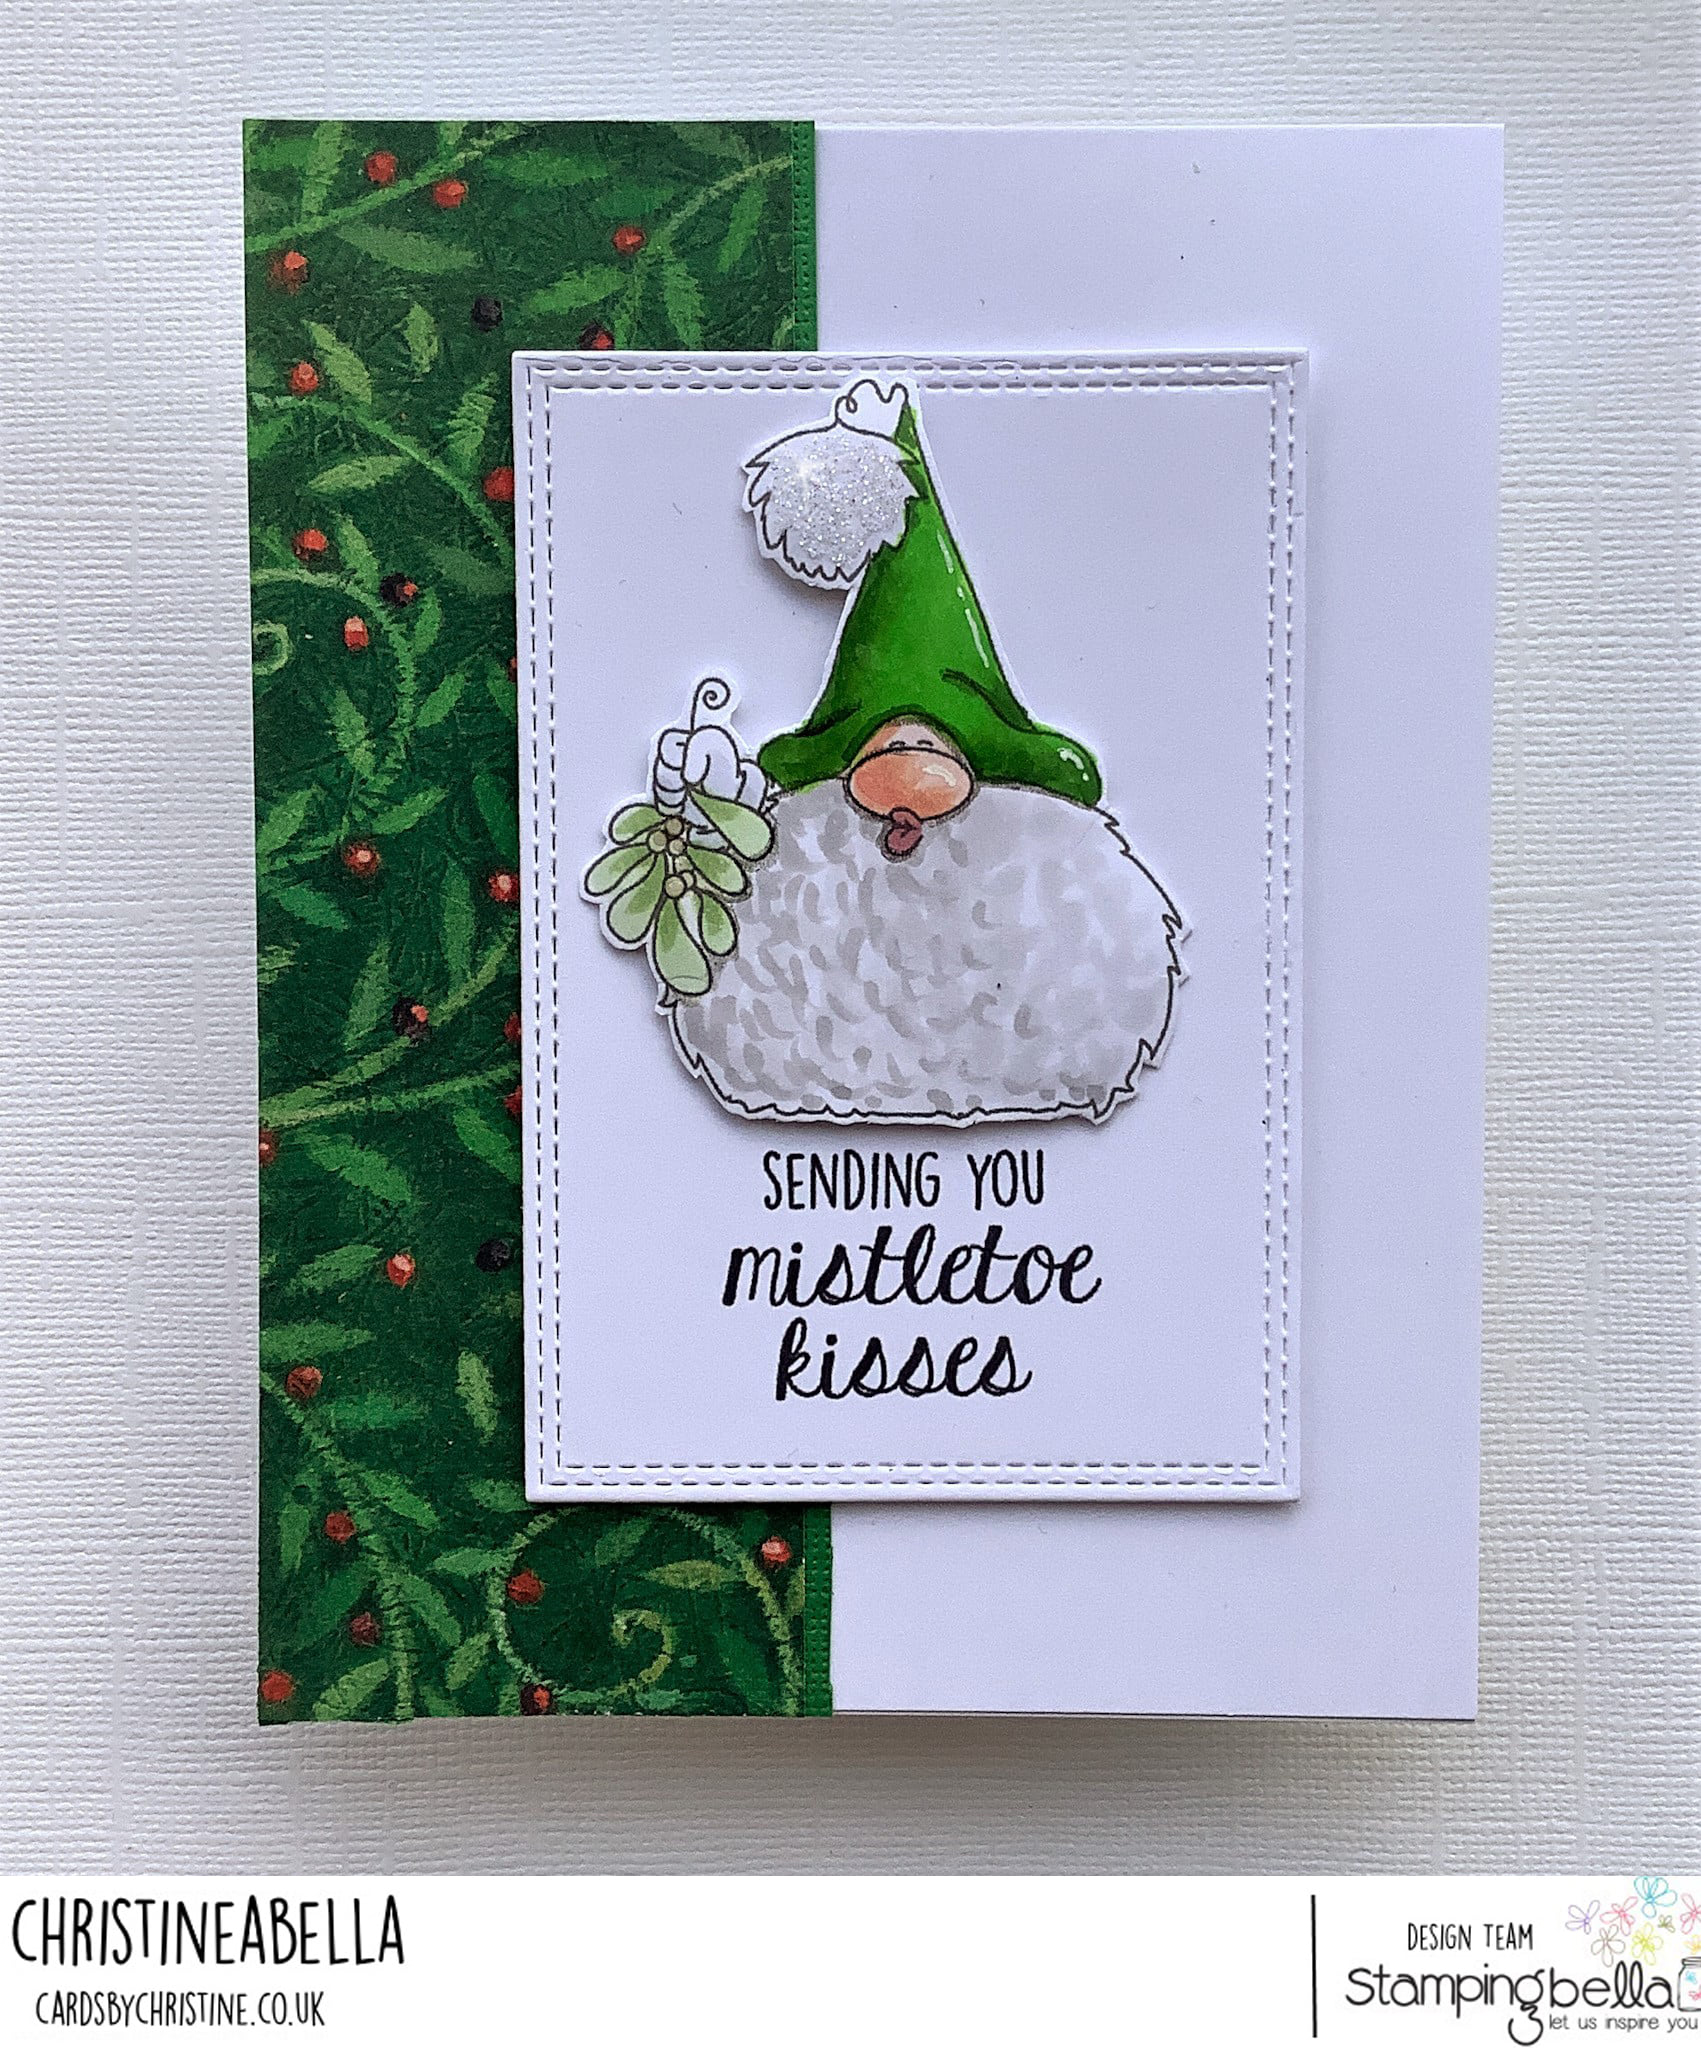 www.stampingbella.com: rubber stamp used: THE GNOME AND THE MISTLETOE, card by CHRISTINE LEVISON